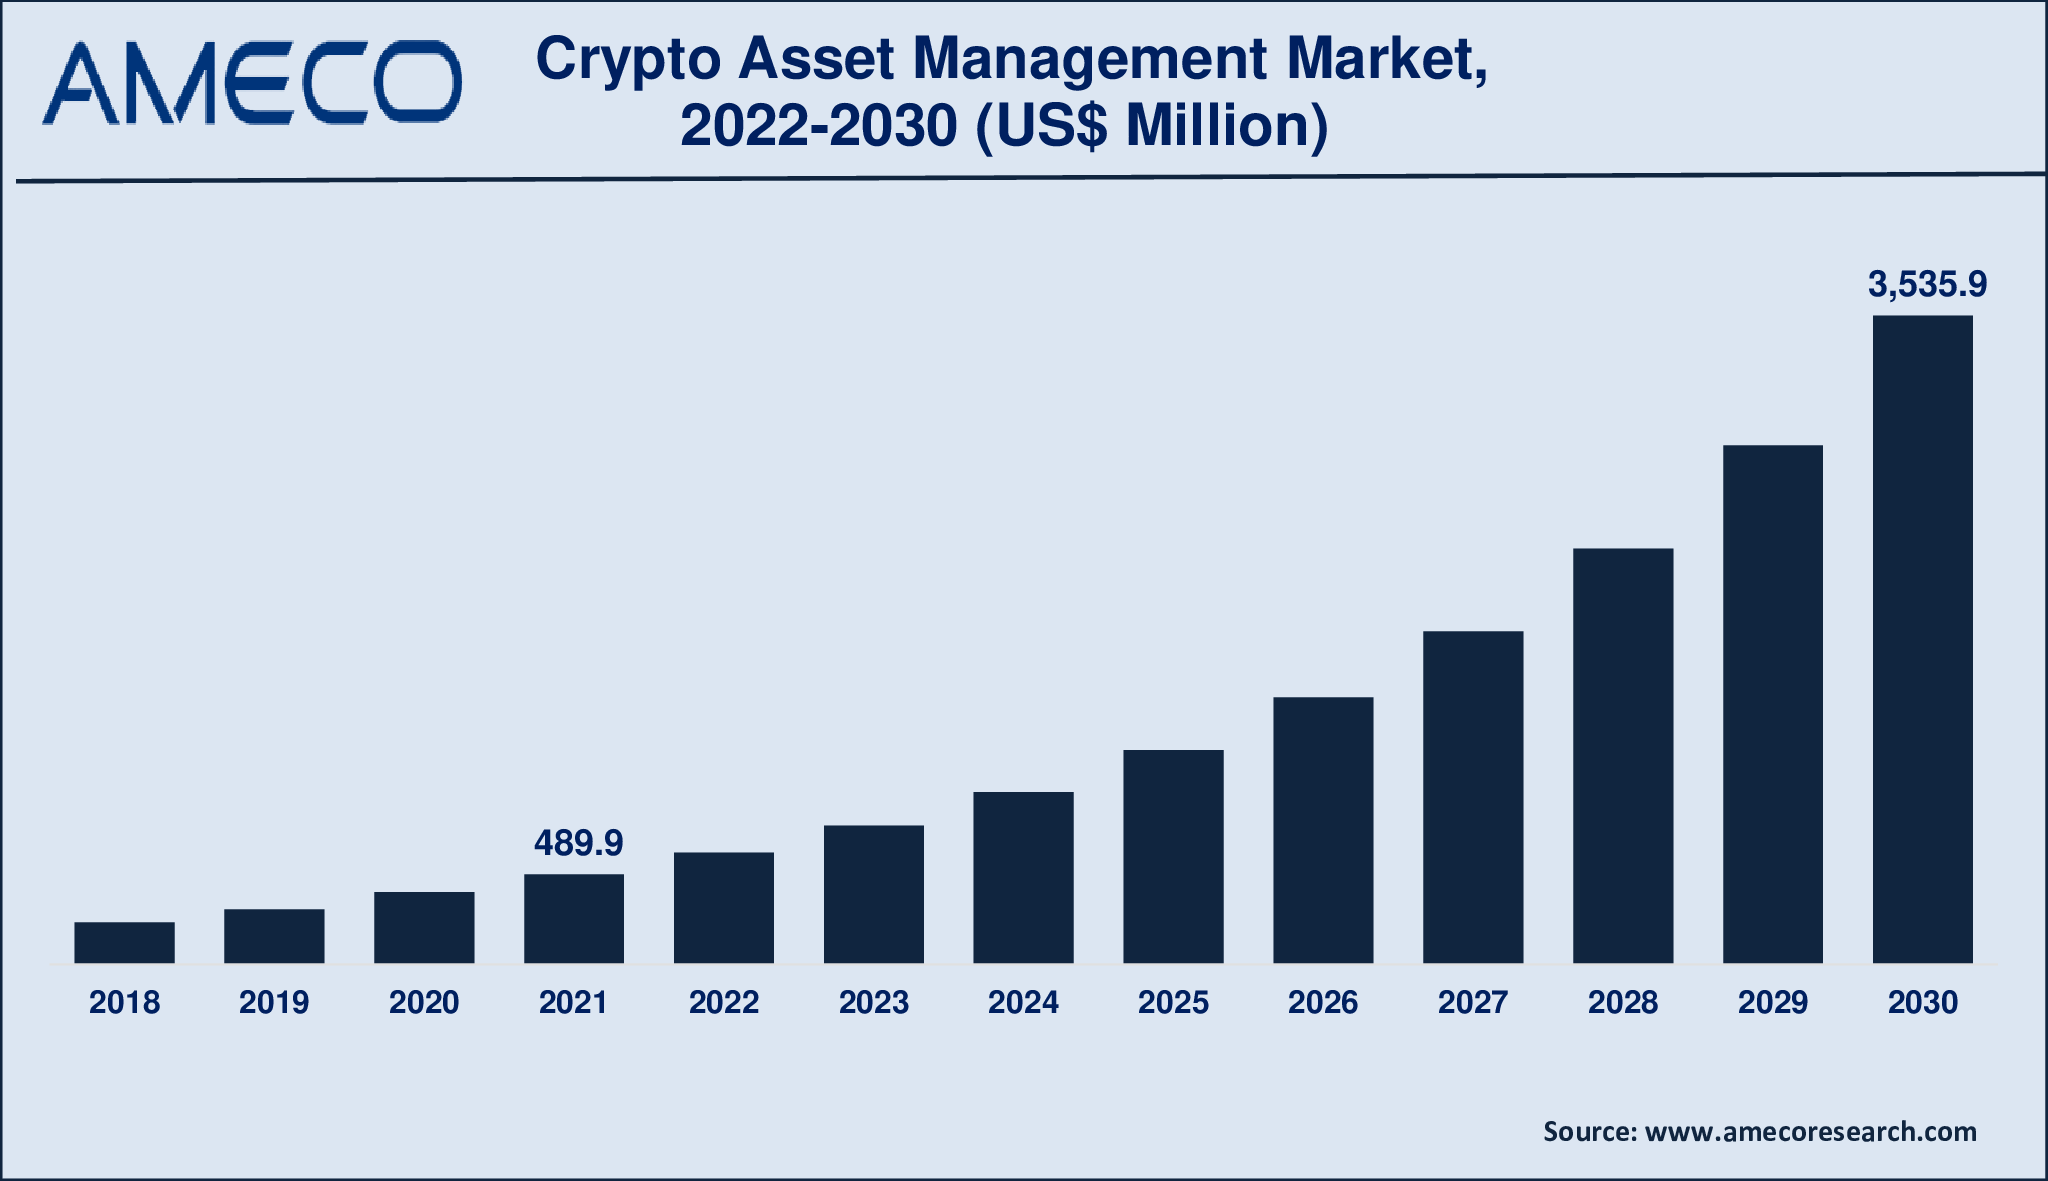 Crypto Asset Management Market Size, Share, Growth, Trends, and Forecast 2022-2030